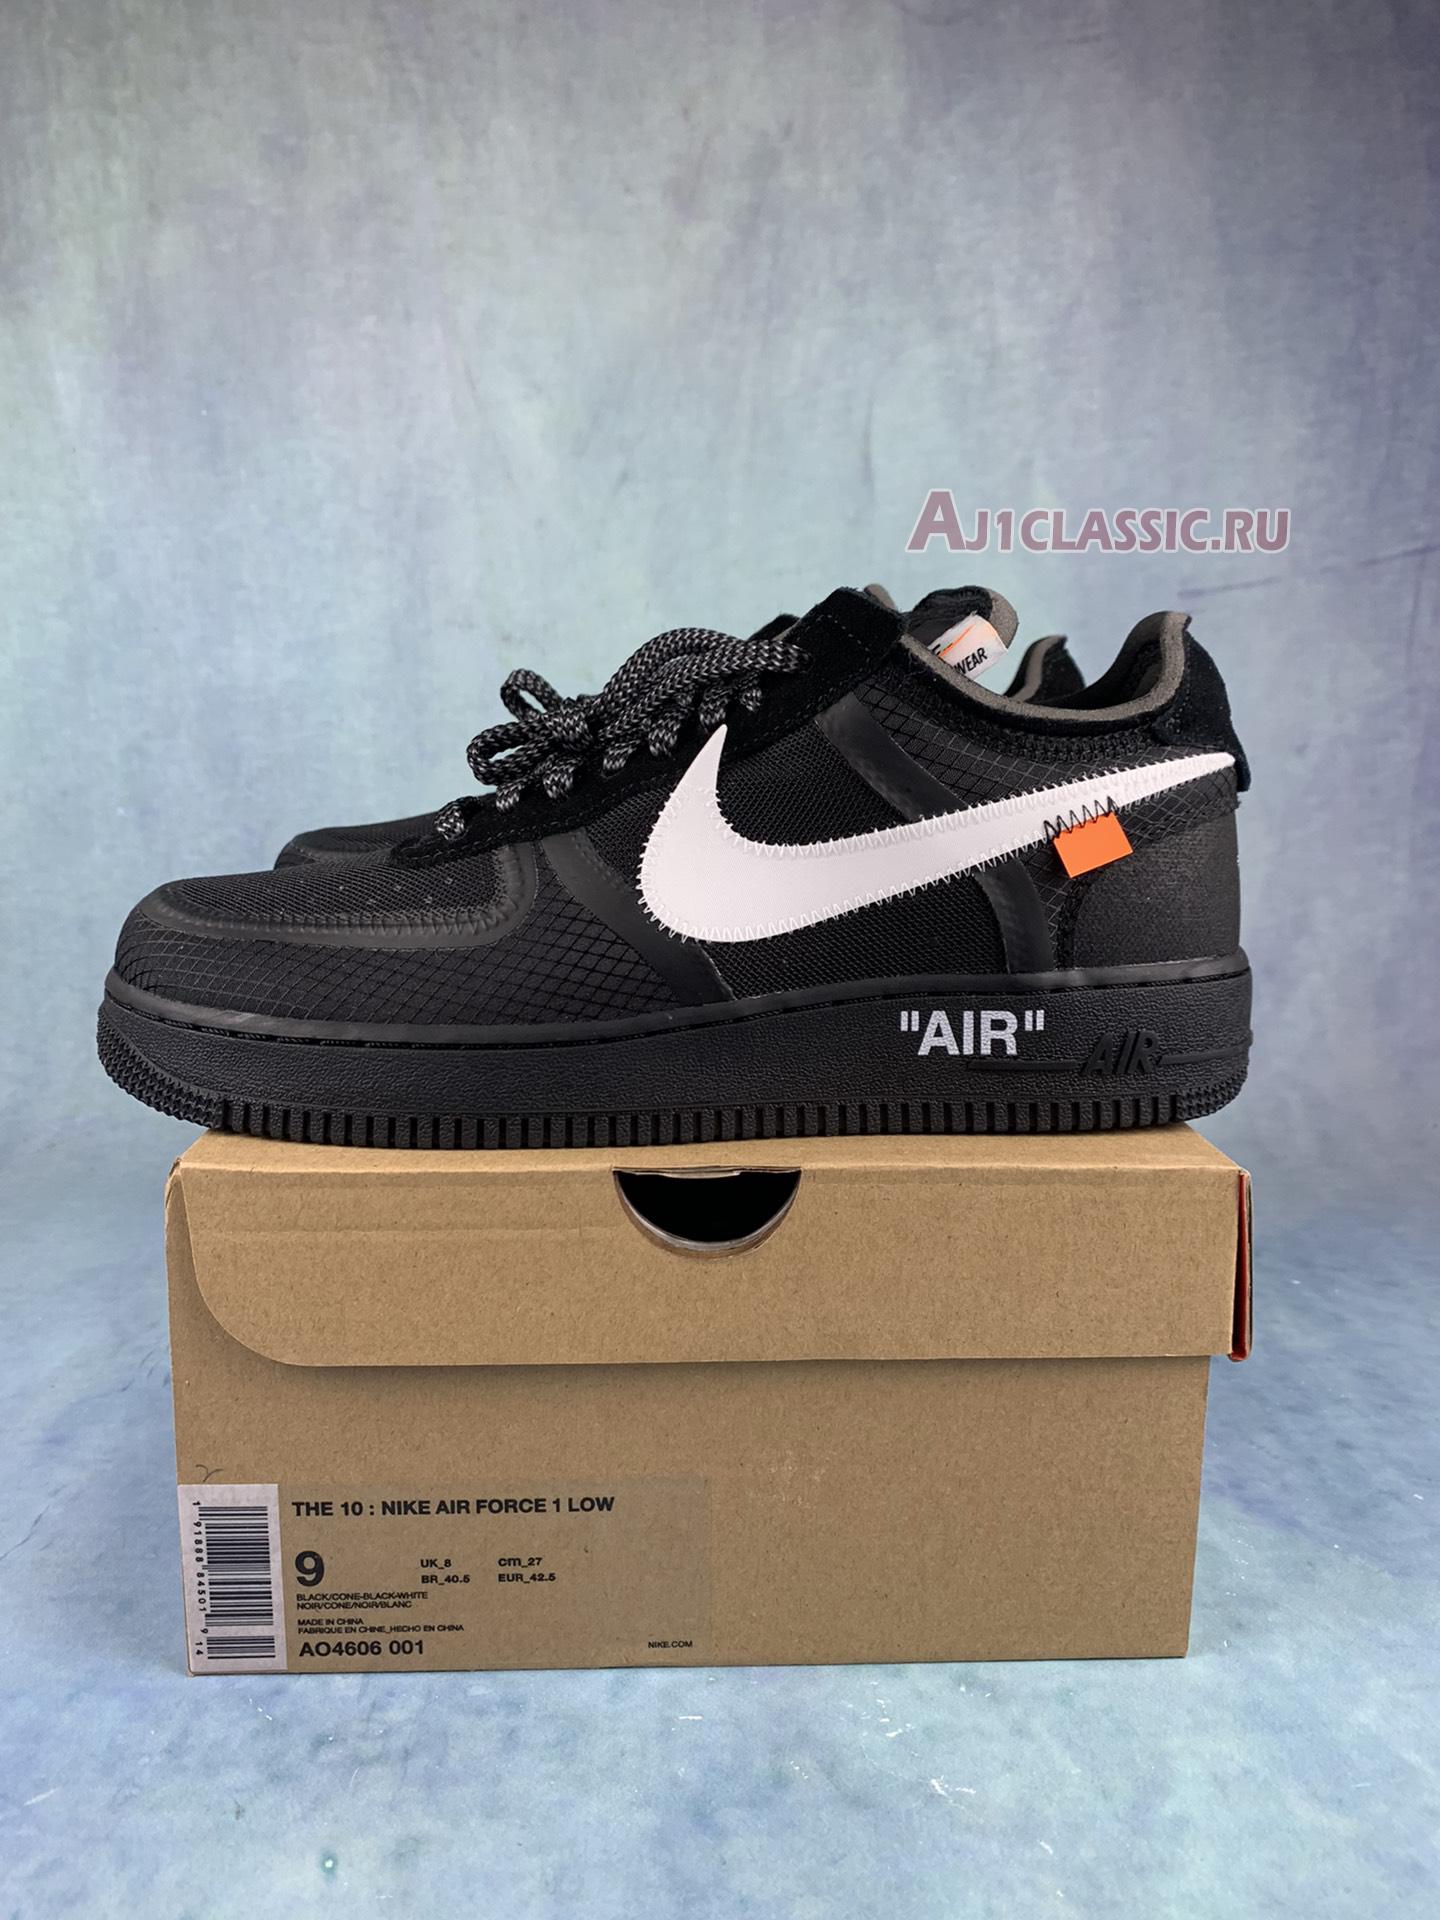 Off-White x Nike Air Force 1 Low Black AO4606-001-2 Black/White-Cone-Black Sneakers